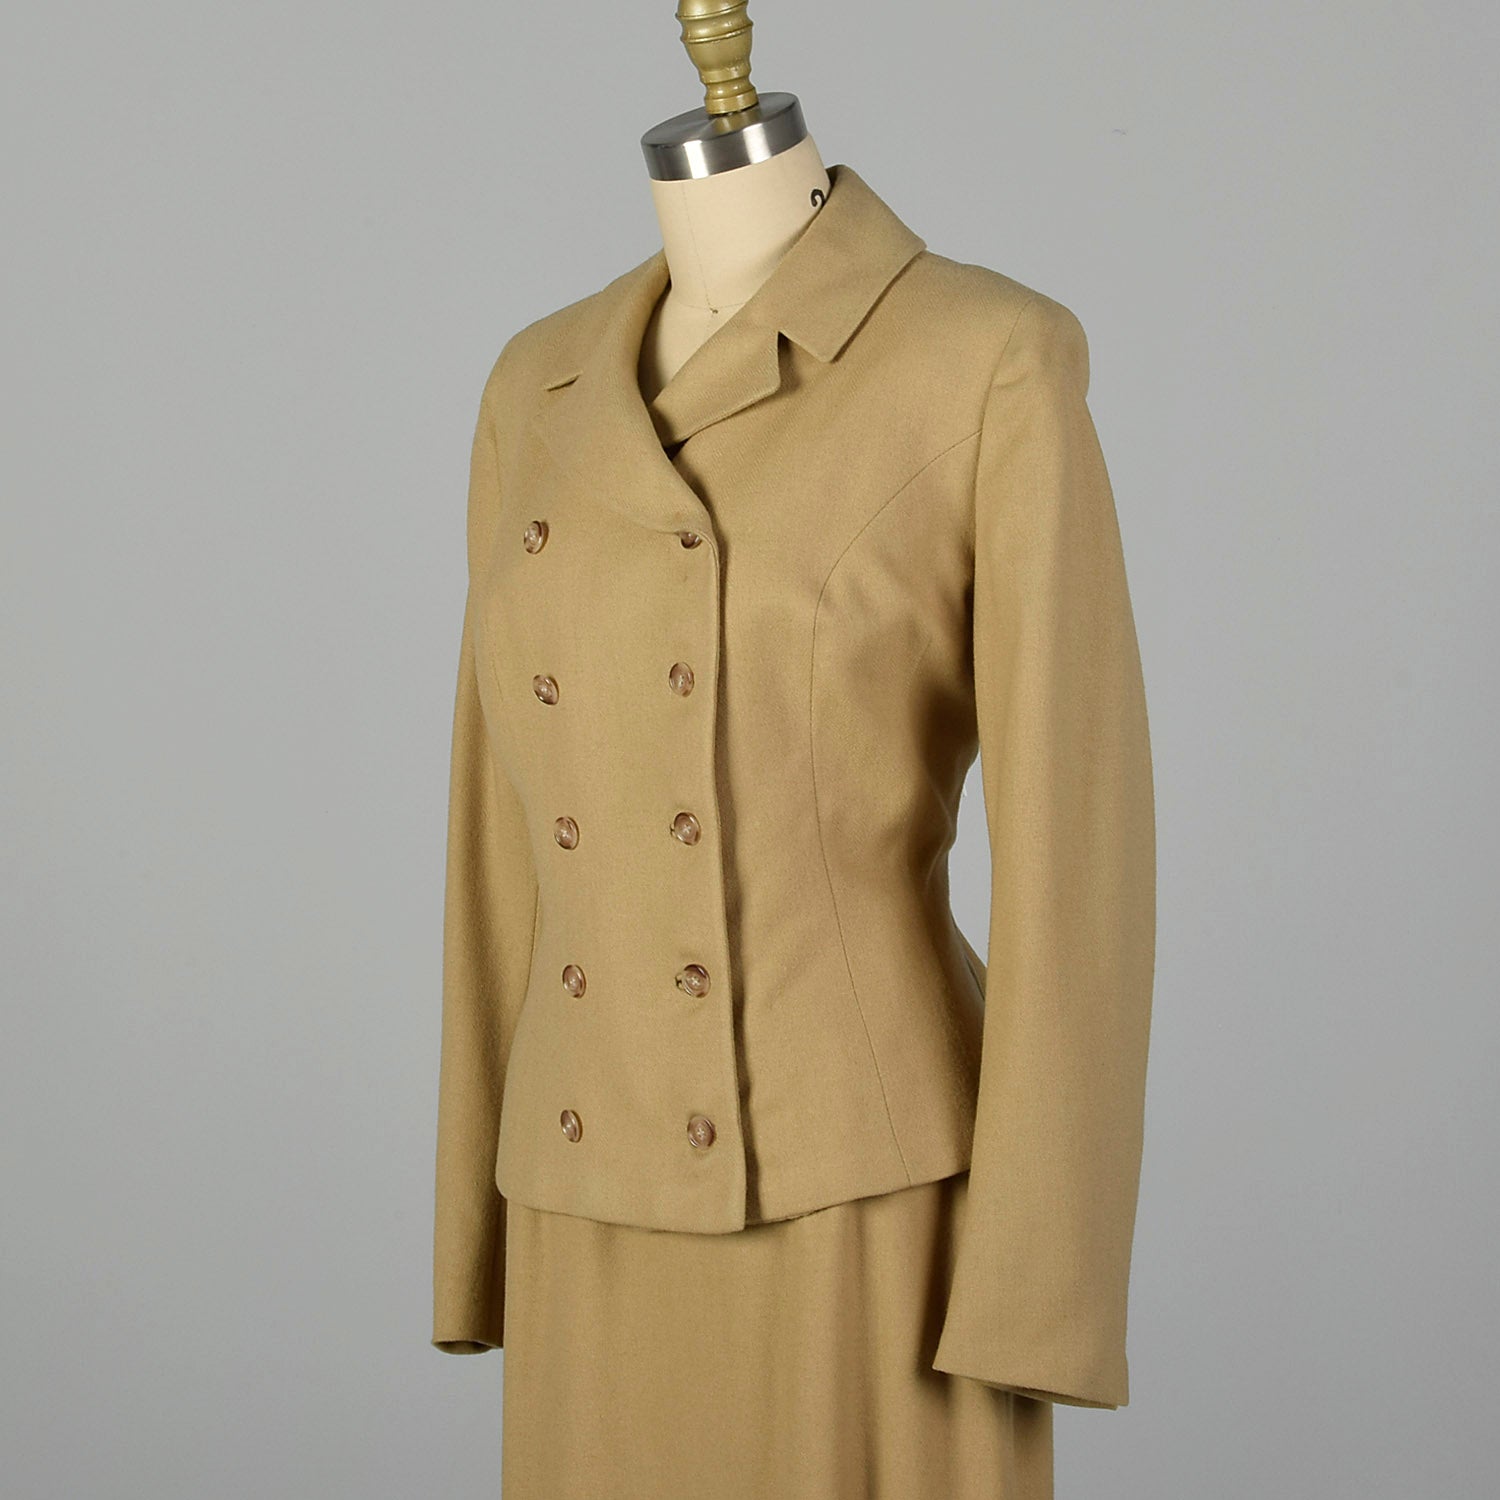 Small 1950s Tan Wool Skirt Suit